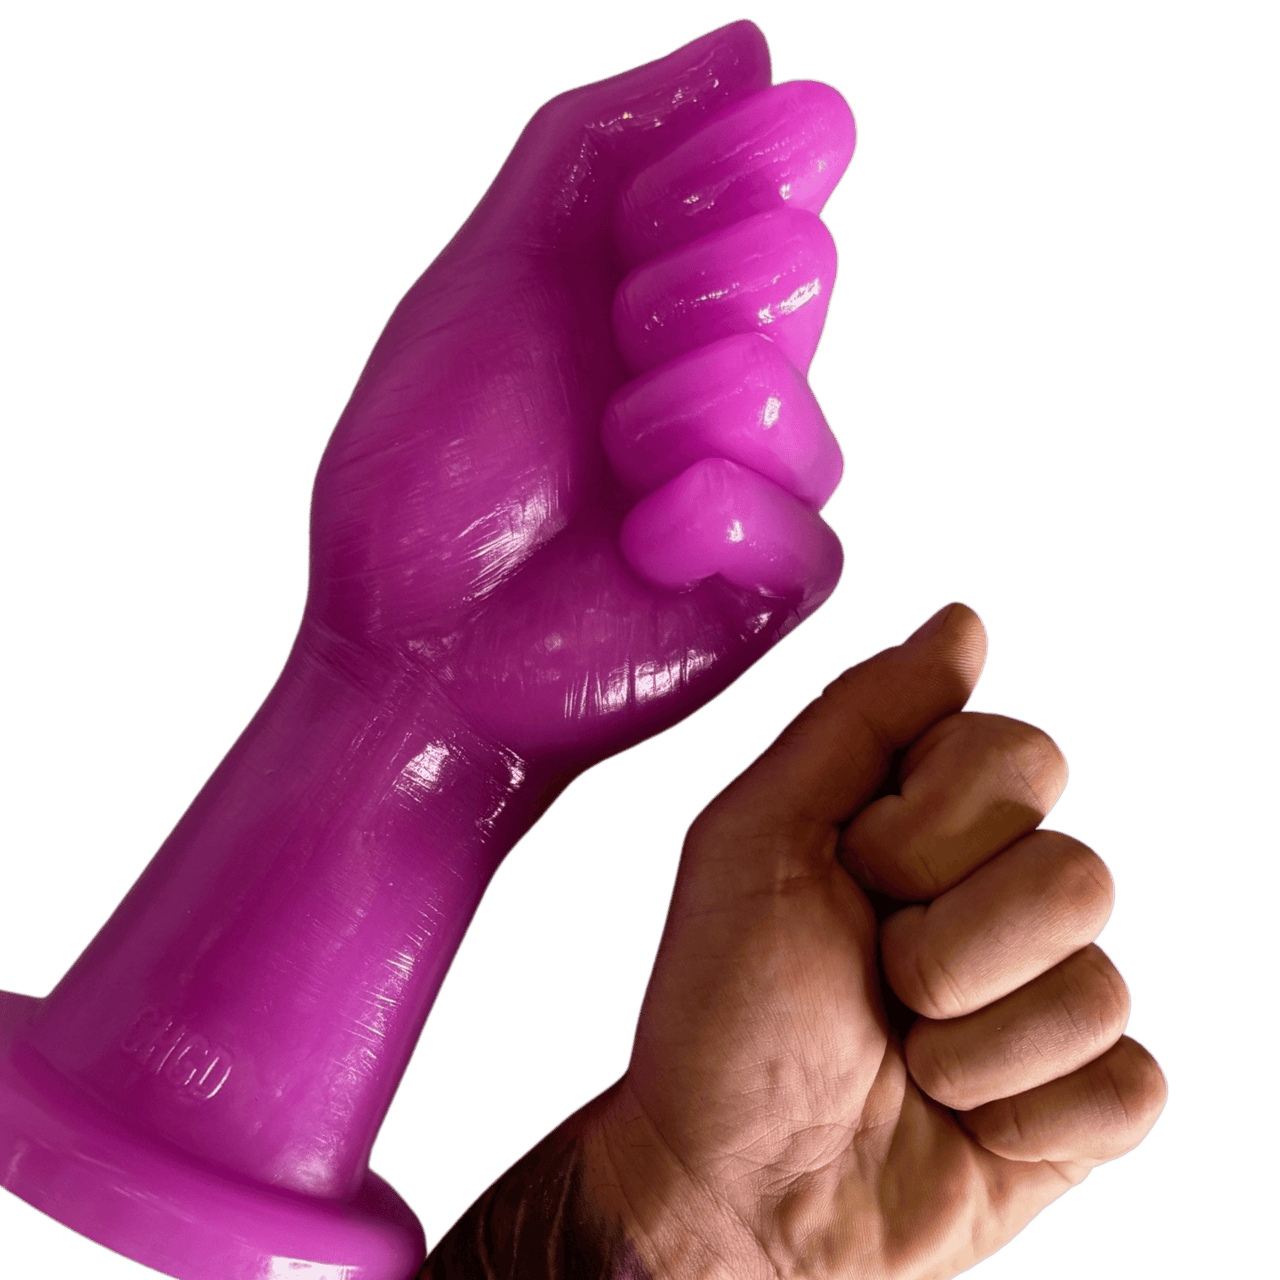 Life-Size Flexible Silicone Fist Sculpture with Suction Cup Base Realistic Erotic Décor Masterpiece